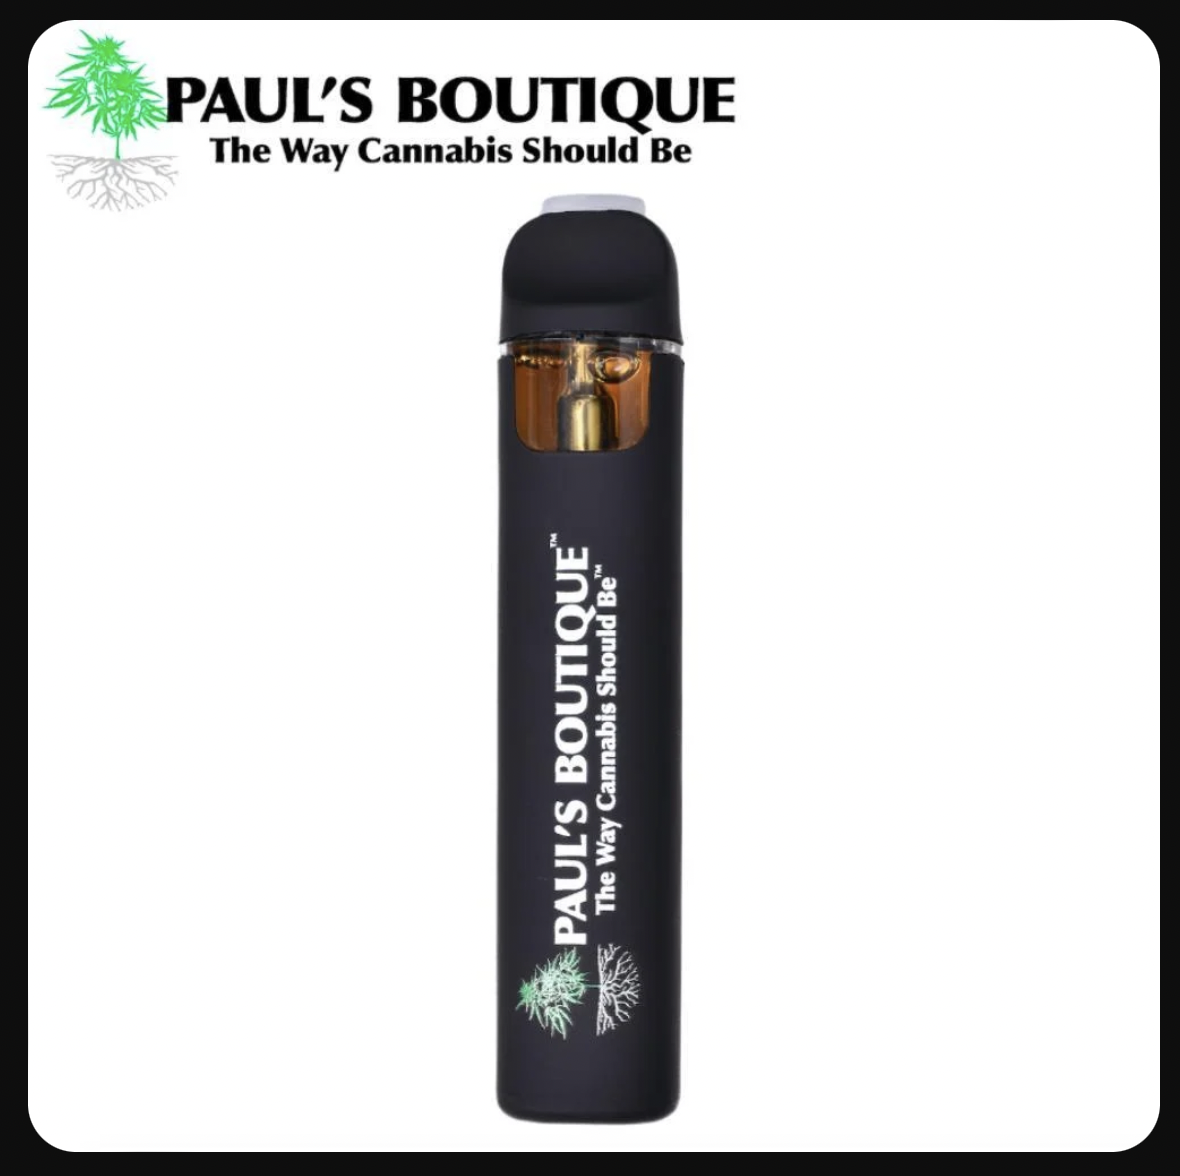 Paul's Boutique Marmalade Cured Resin Disposable